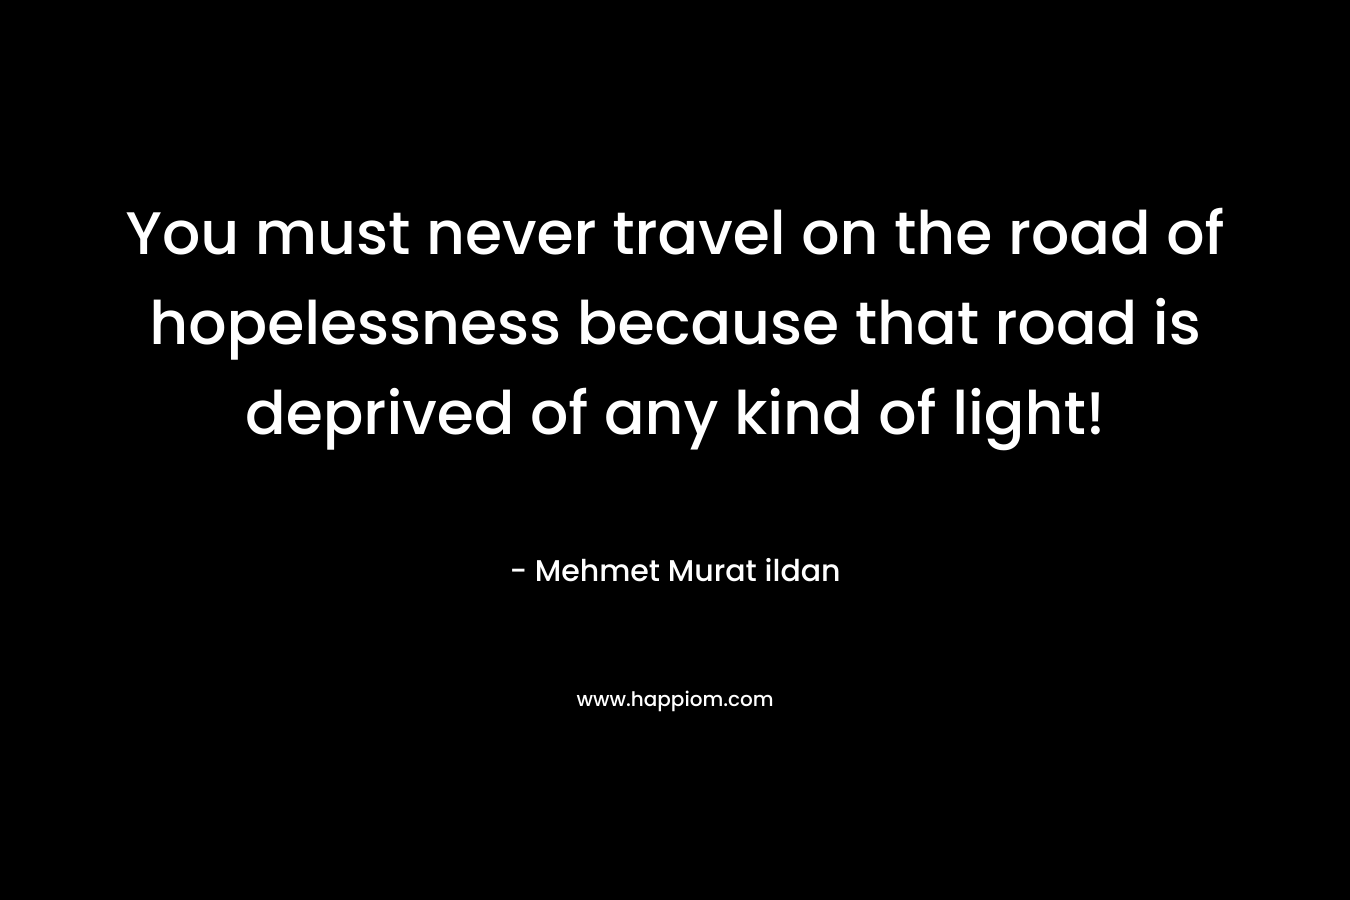 You must never travel on the road of hopelessness because that road is deprived of any kind of light! – Mehmet Murat ildan